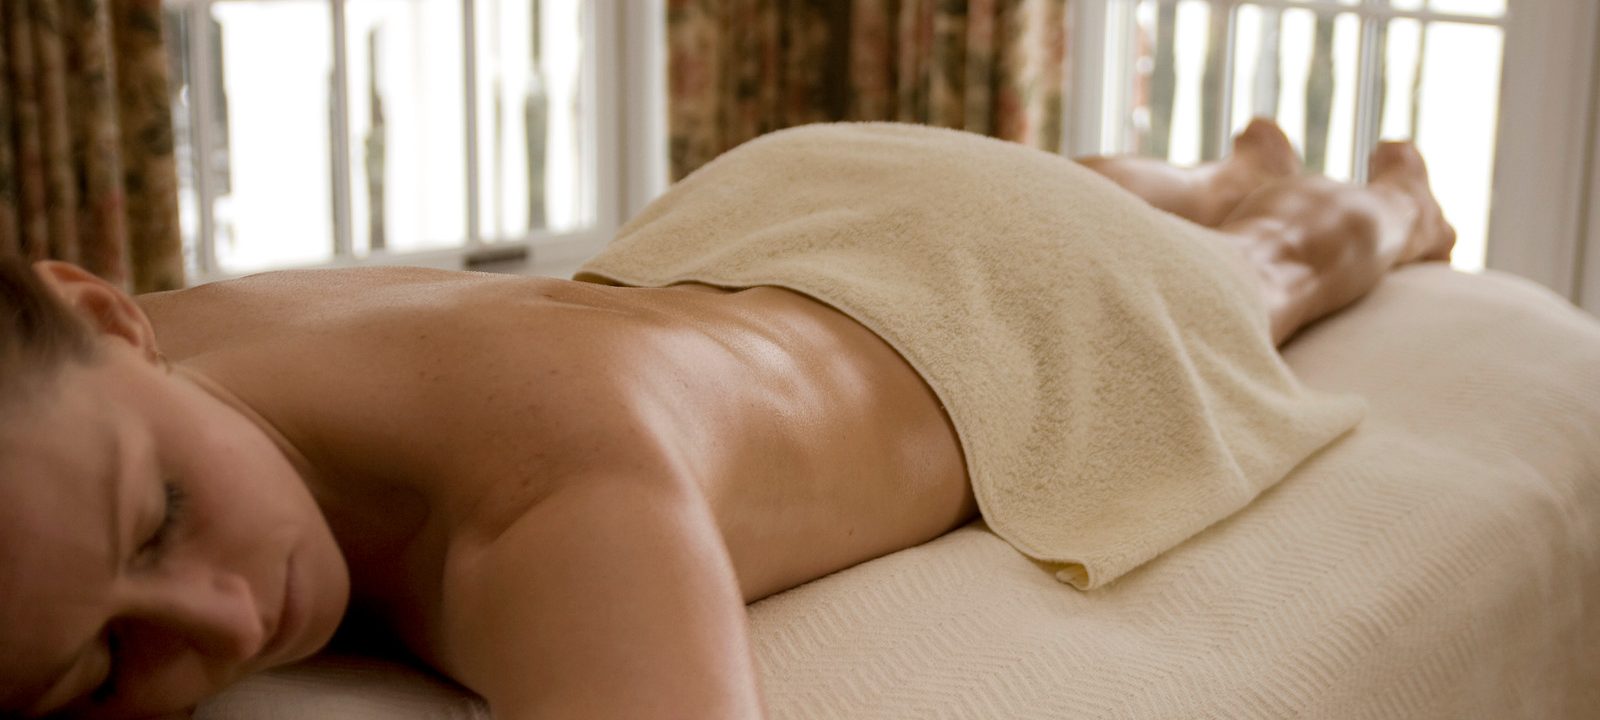 Ontario’s Ste. Anne’s Spa introduces a chill massage using cannabis